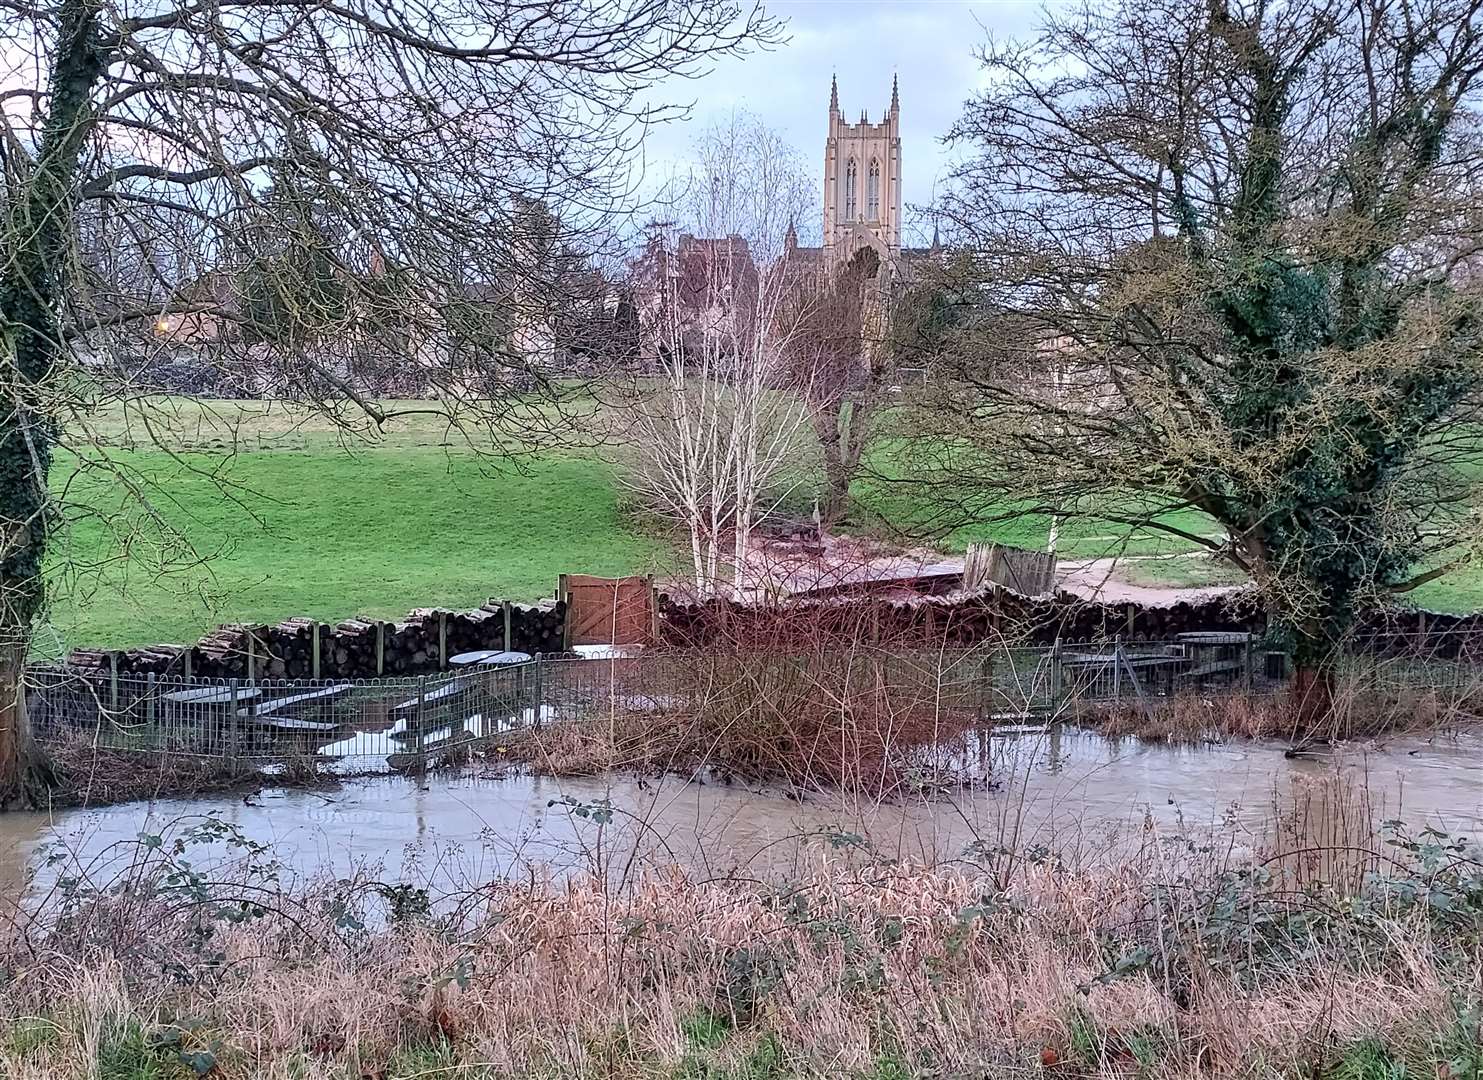 The view of the River Lark and the Abbey Gardens looking towards St Edmundsbury Cathedral. Picture: Mariam Ghaemi